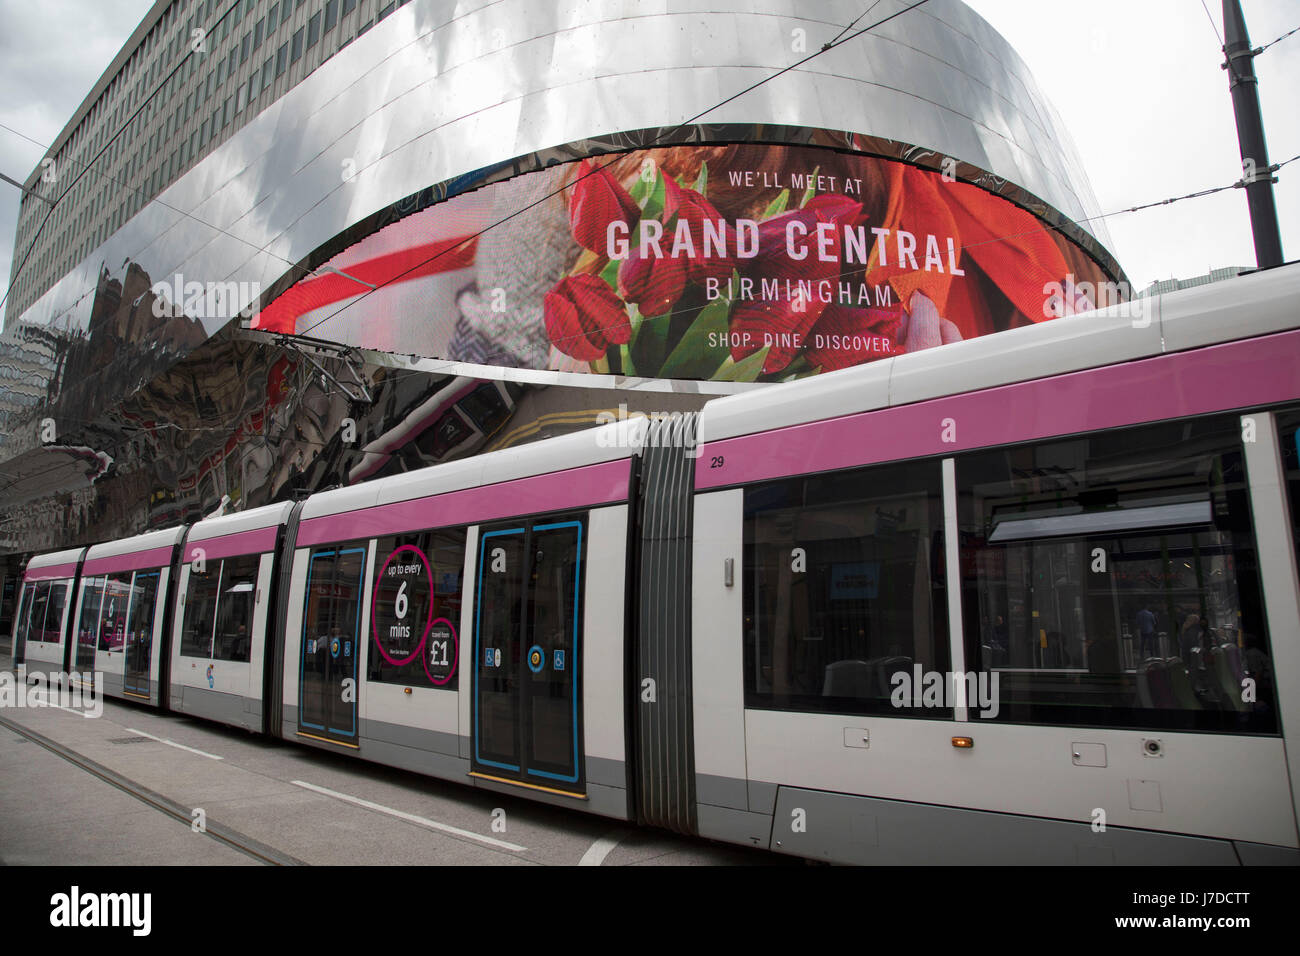 Exterior of Grand Central with a passing Midland Metro light-rail tram in Birmingham, United Kingdom. Grand Central is a shopping centre located in Birmingham, England, that opened on 24 September 2015. It is currently owned by Hammerson and CPPIB. The original centre was built in 1971 as part of the reconstruction of Birmingham New Street station. It was known as the Birmingham Shopping Centre before being renamed as The Pallasades. As part of the New Street Station Gateway Plus redevelopment, Grand Central underwent a major overhaul. The mall has been redesigned with a glass atrium roof as c Stock Photo